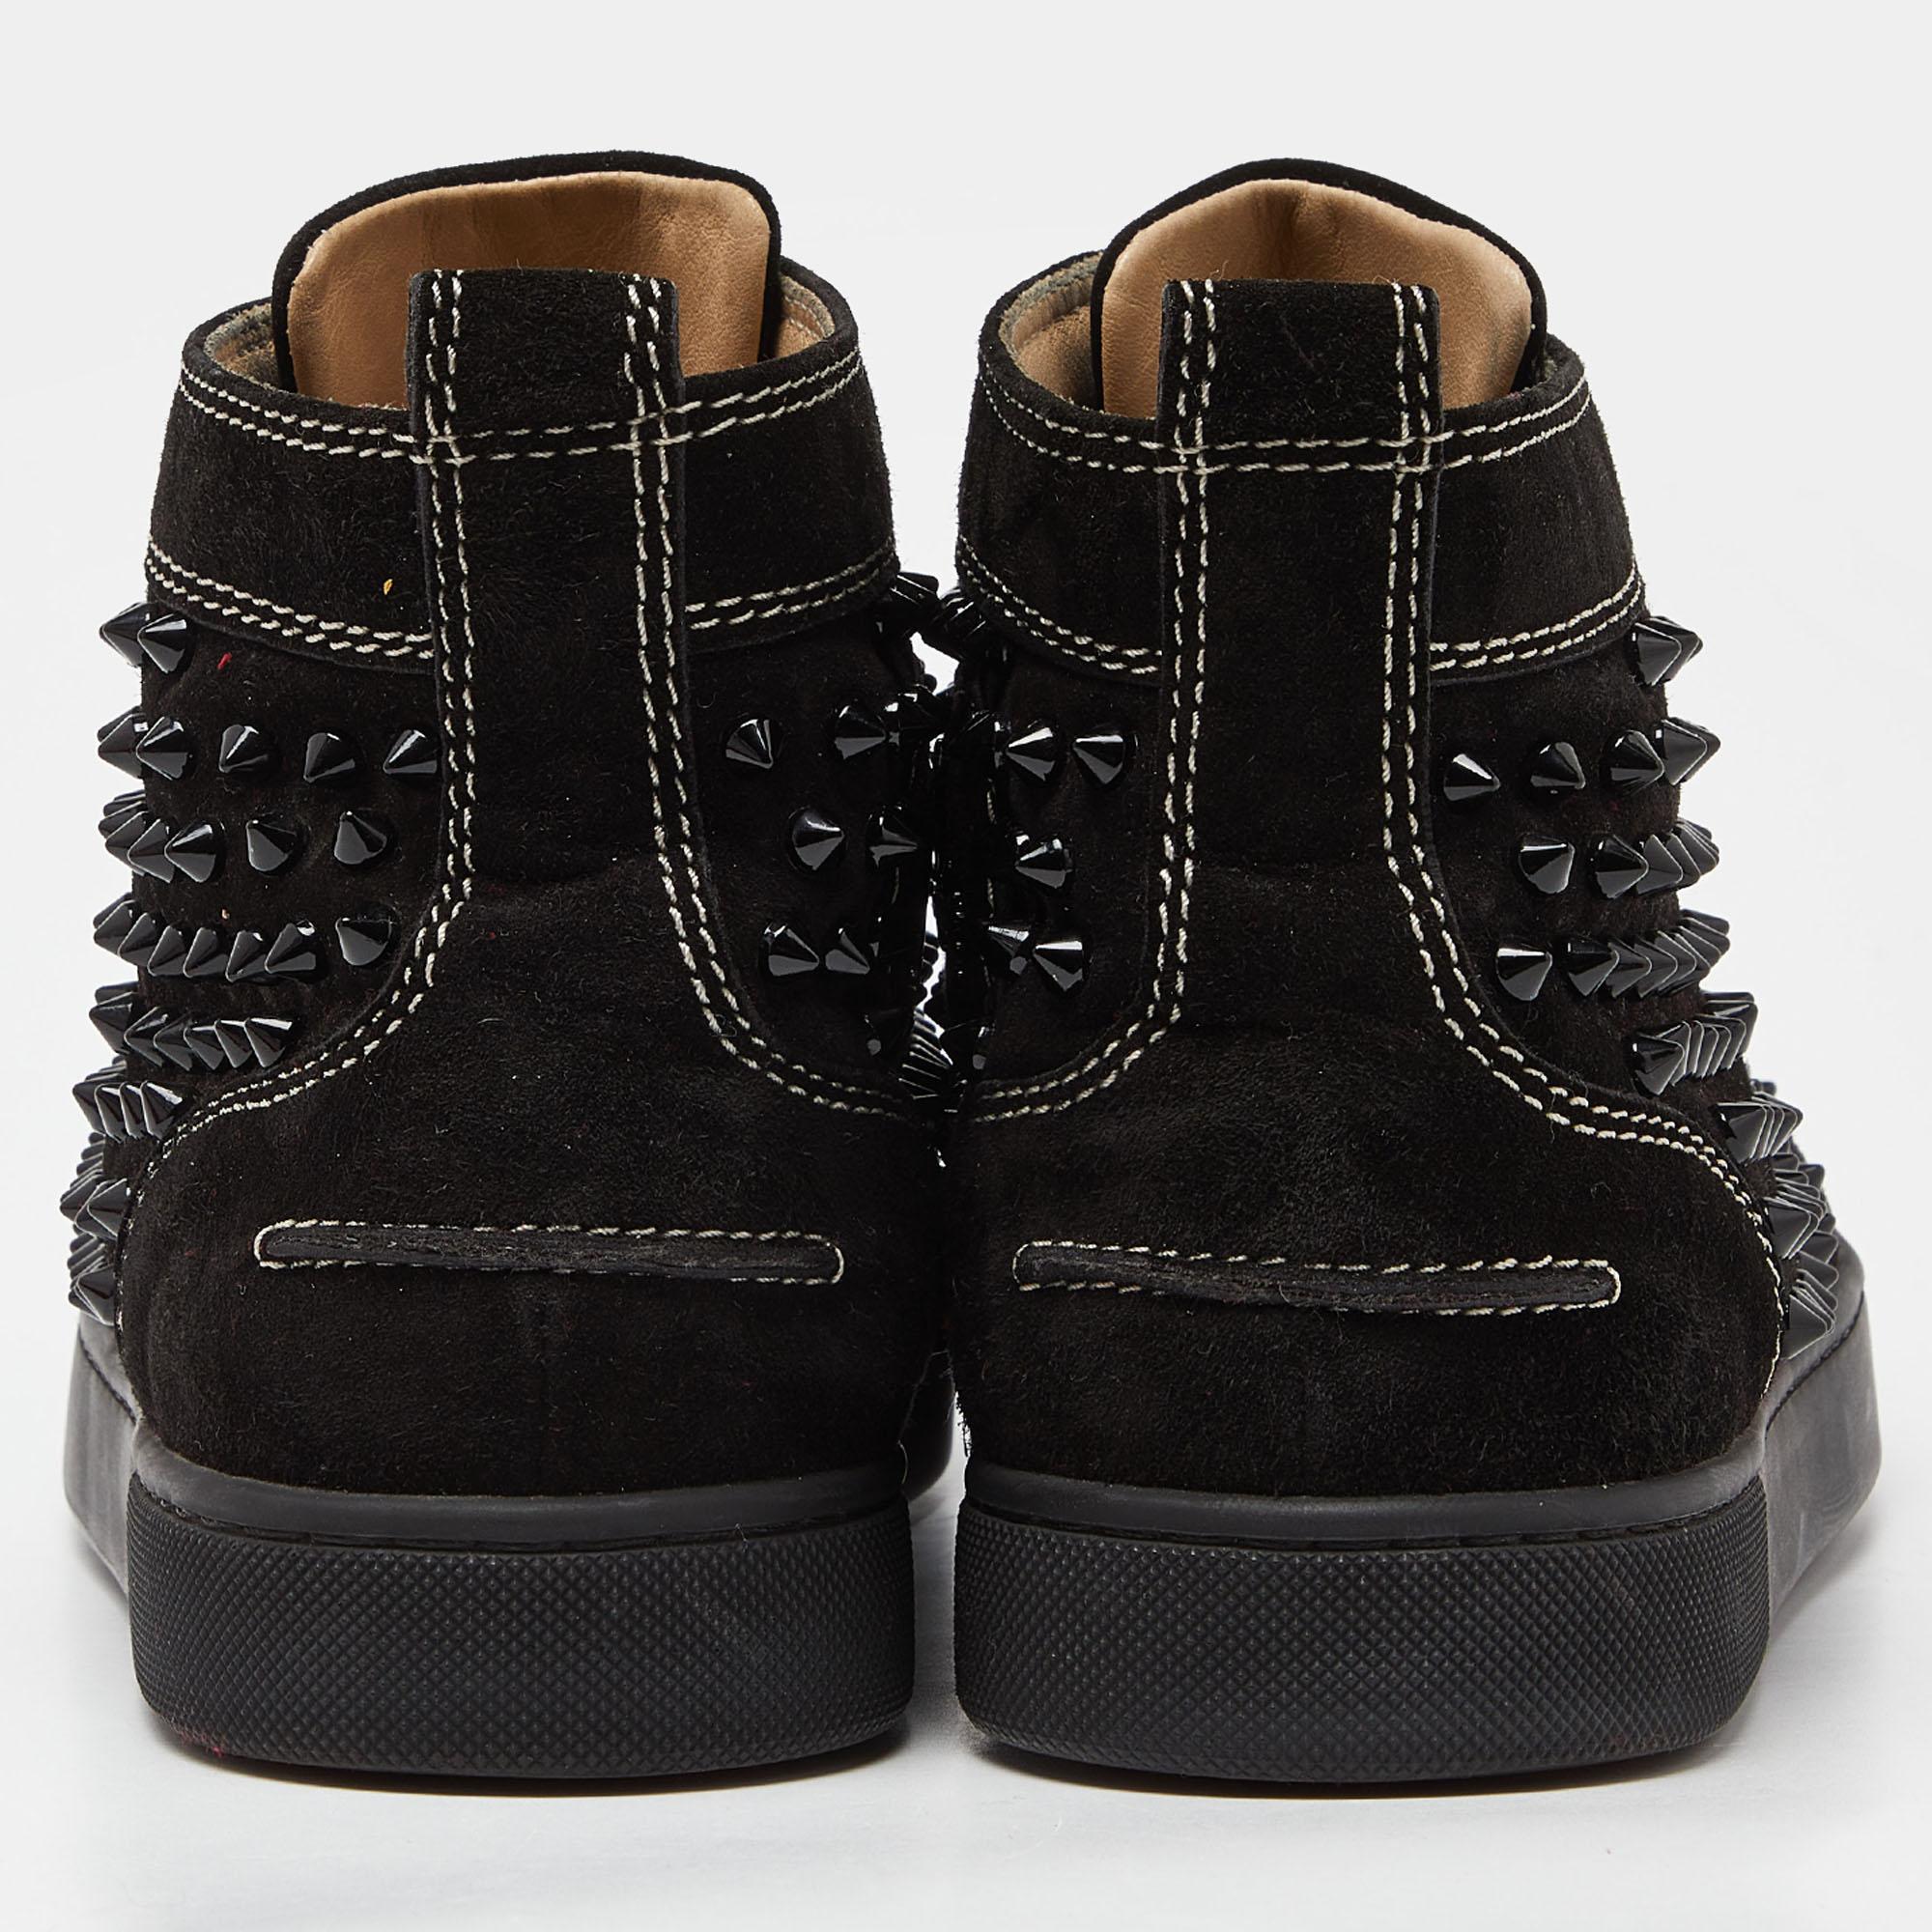 Christian Louboutin Black Suede Spike High Top Sneakers Size 40 For Sale 2